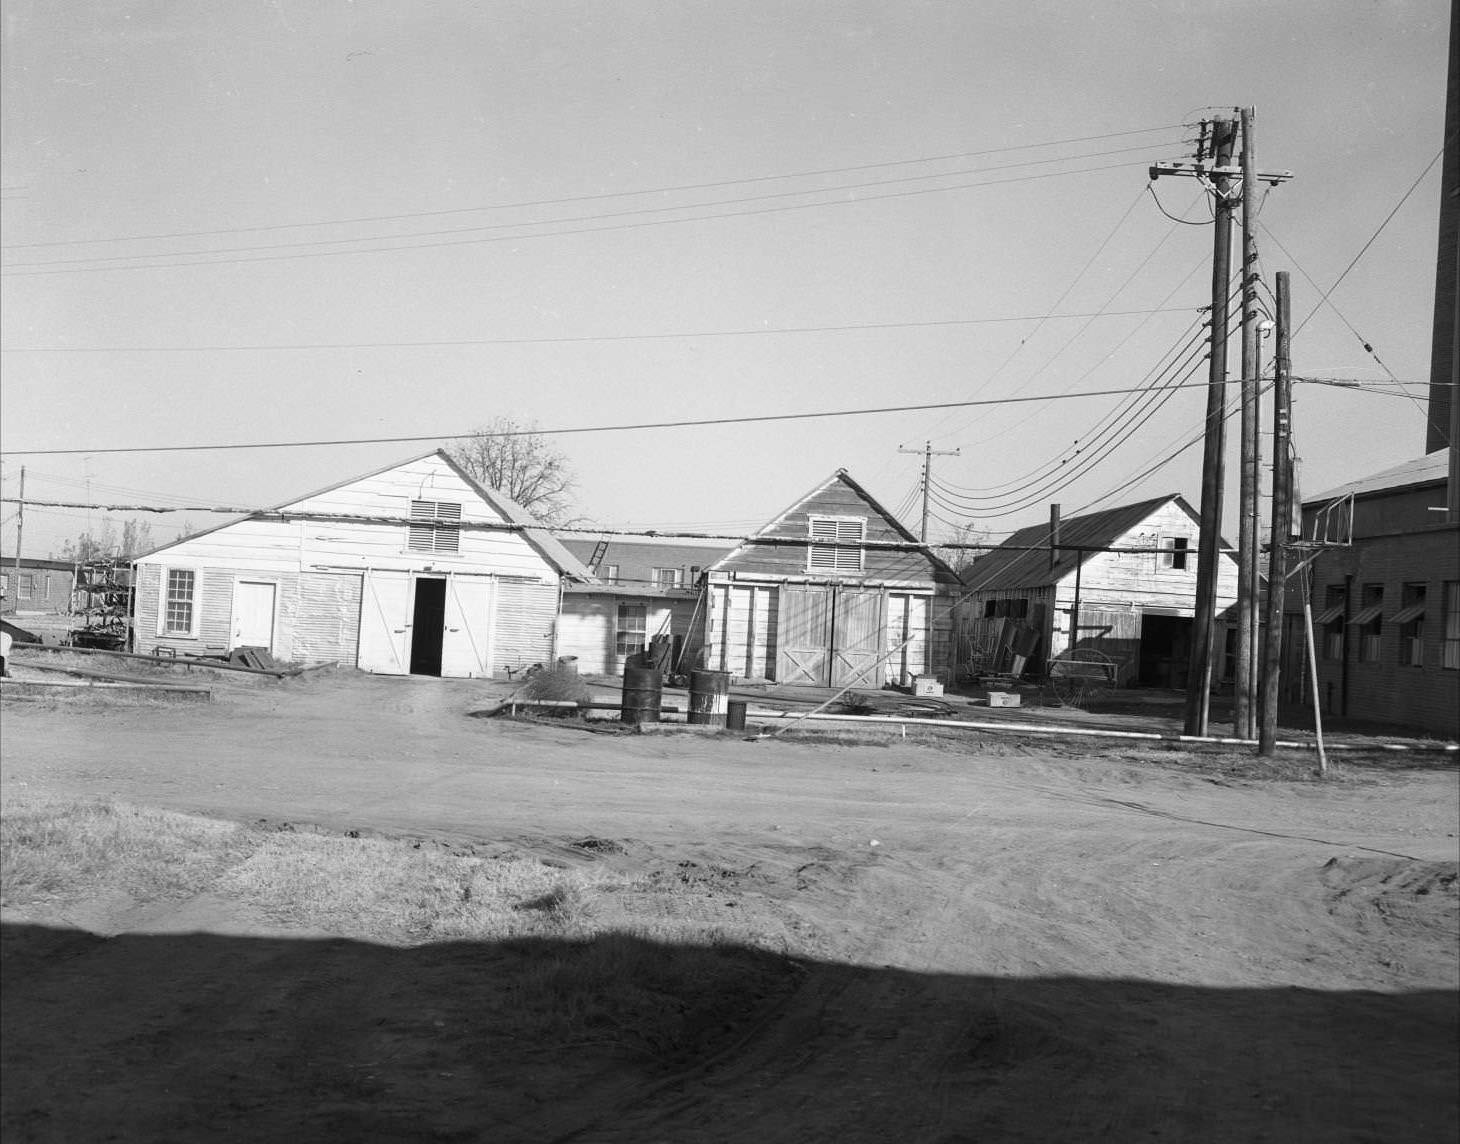 Abilene State School, 1958. In this image are three whether worn barns off the side of a dirt road.